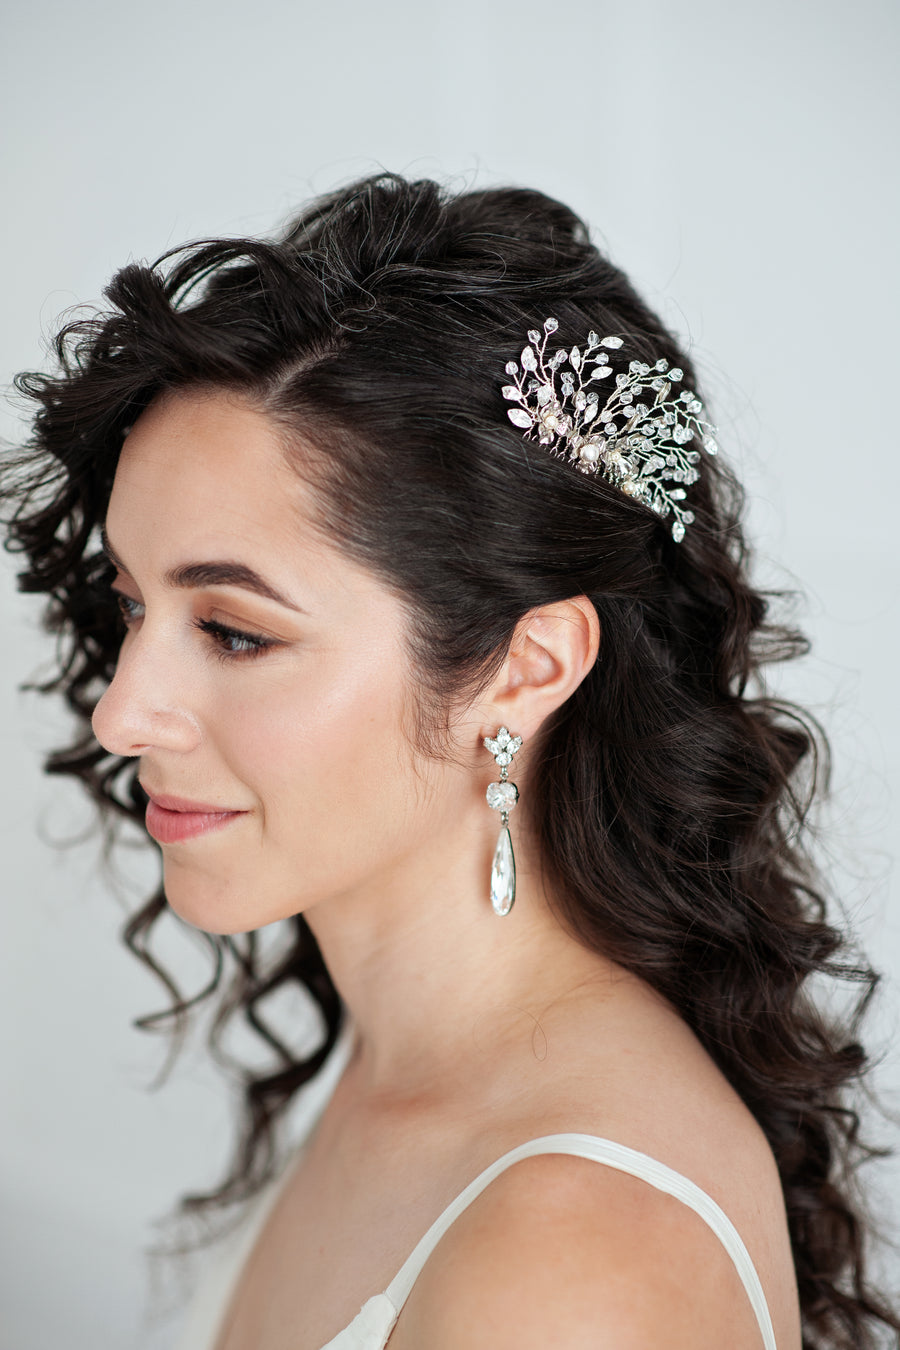 Bride wearing vintage bridal hair comb in crystal and silver by Joanna Bisley Designs.